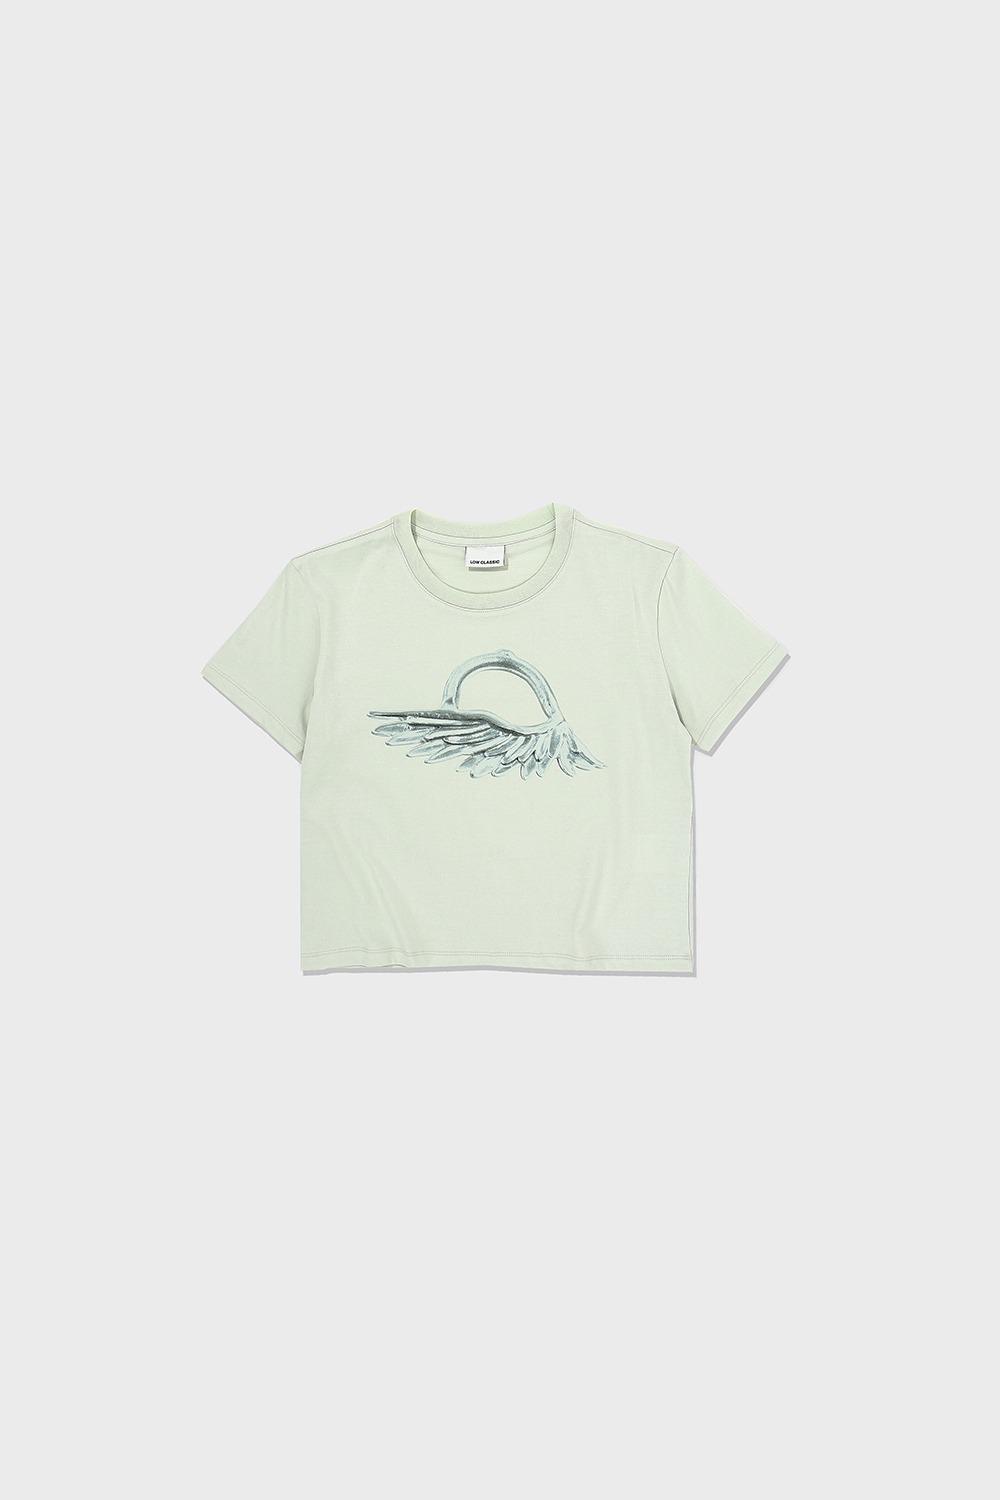 WING GRAPHIC T-SHIRT - MINT